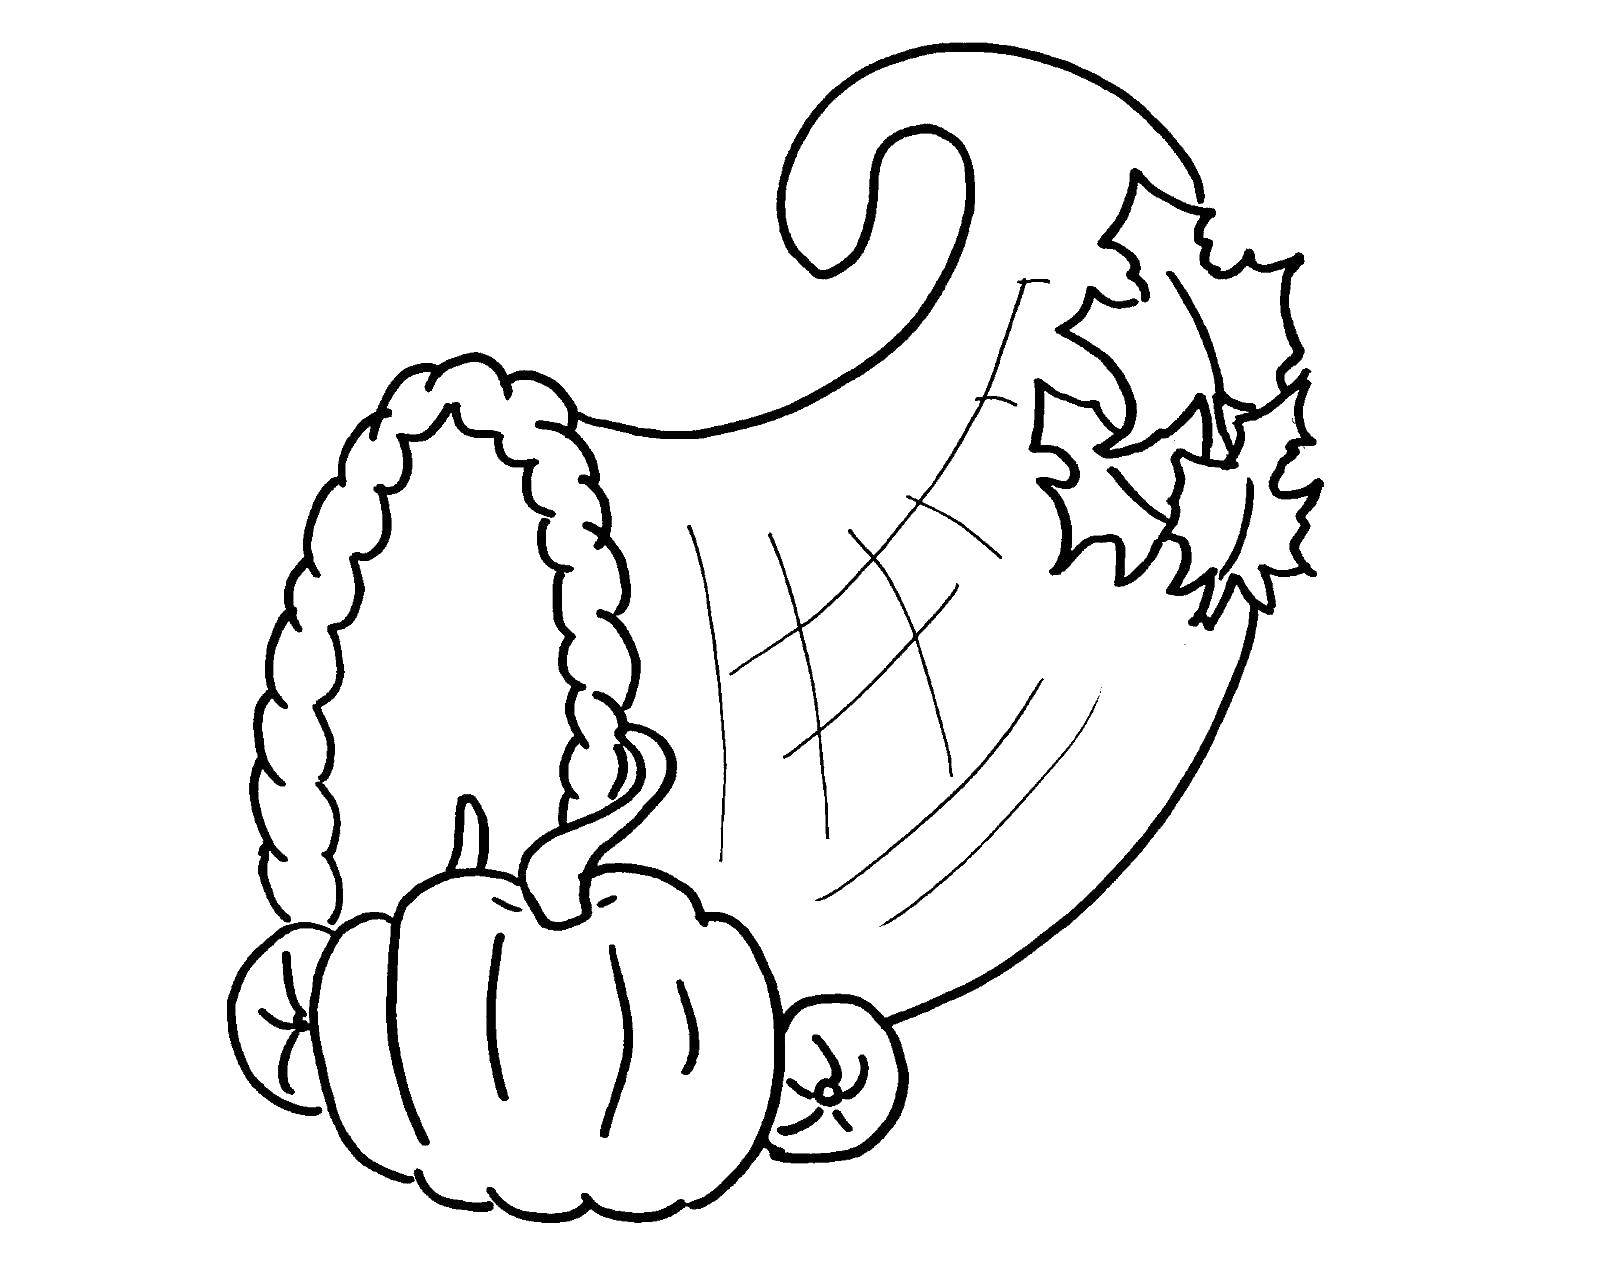 Coloring Autumn gifts. Category Autumn. Tags:  autumn, leaves, pumpkin.